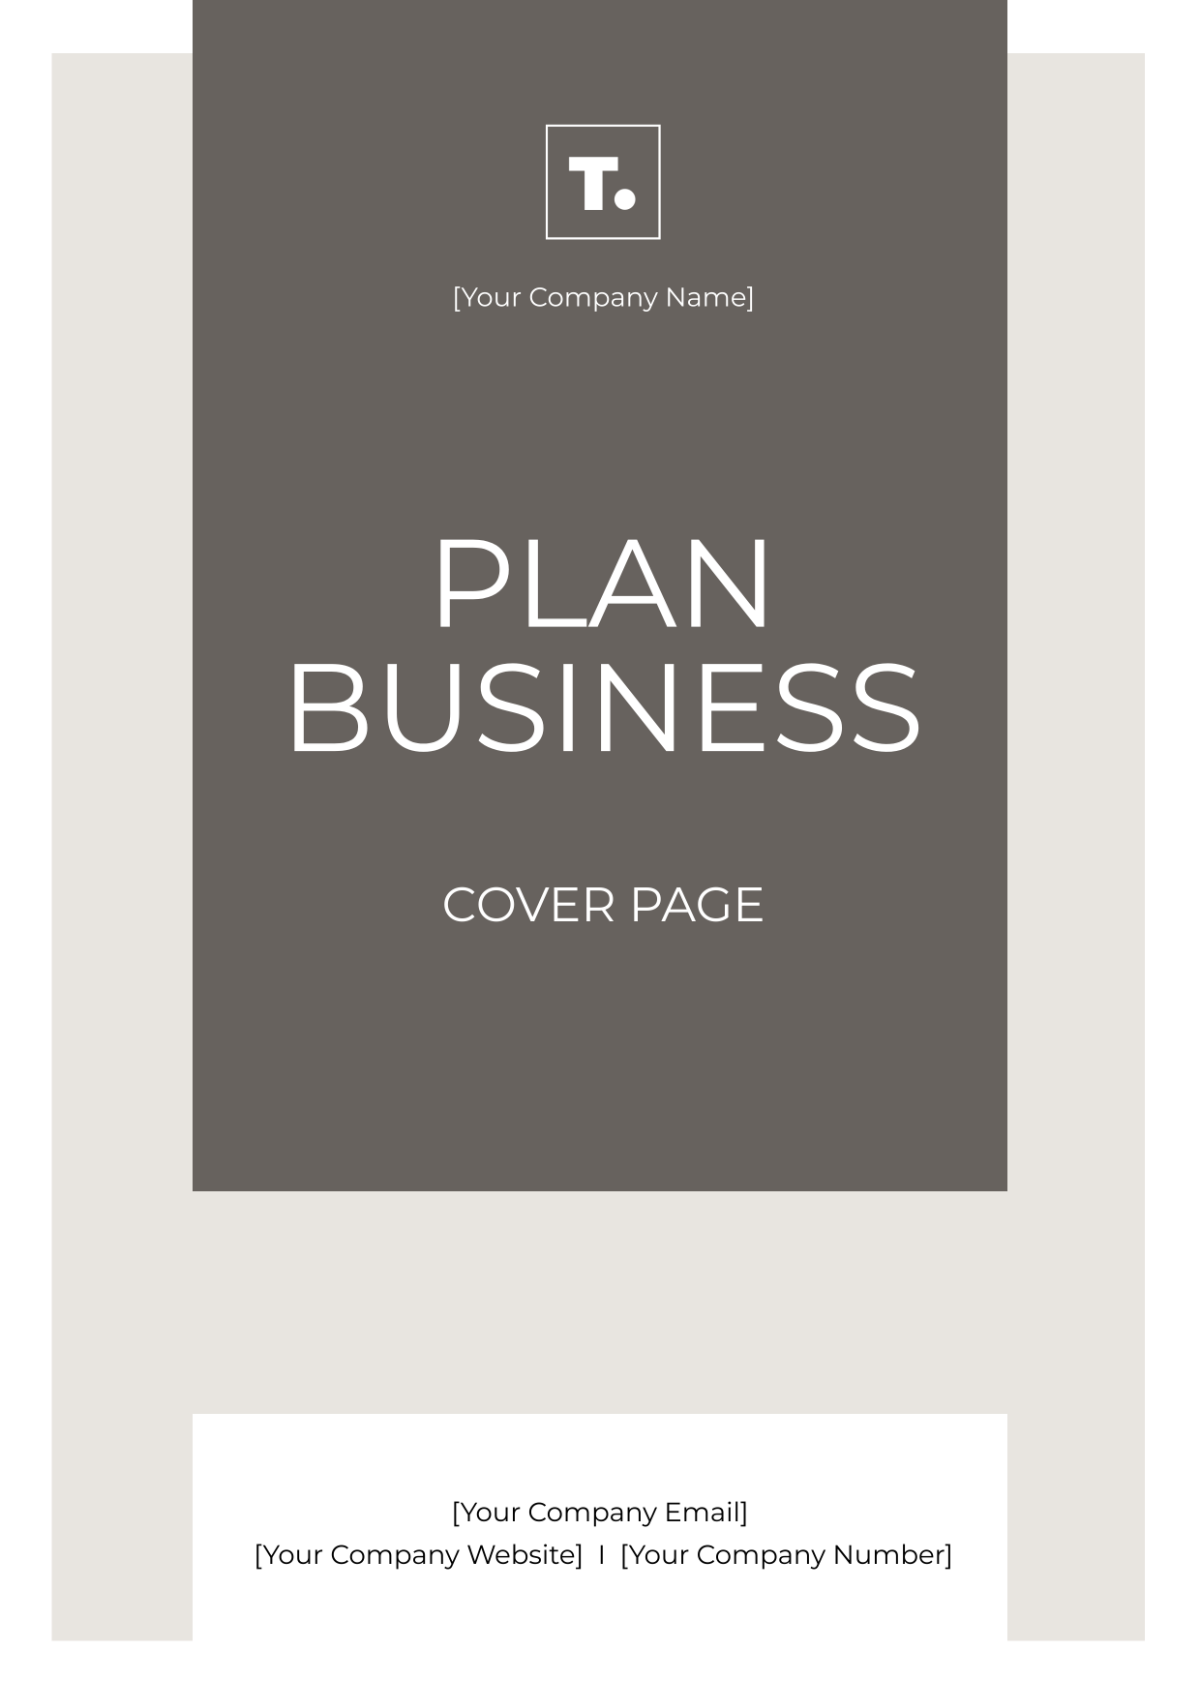 Plan Business Cover Page